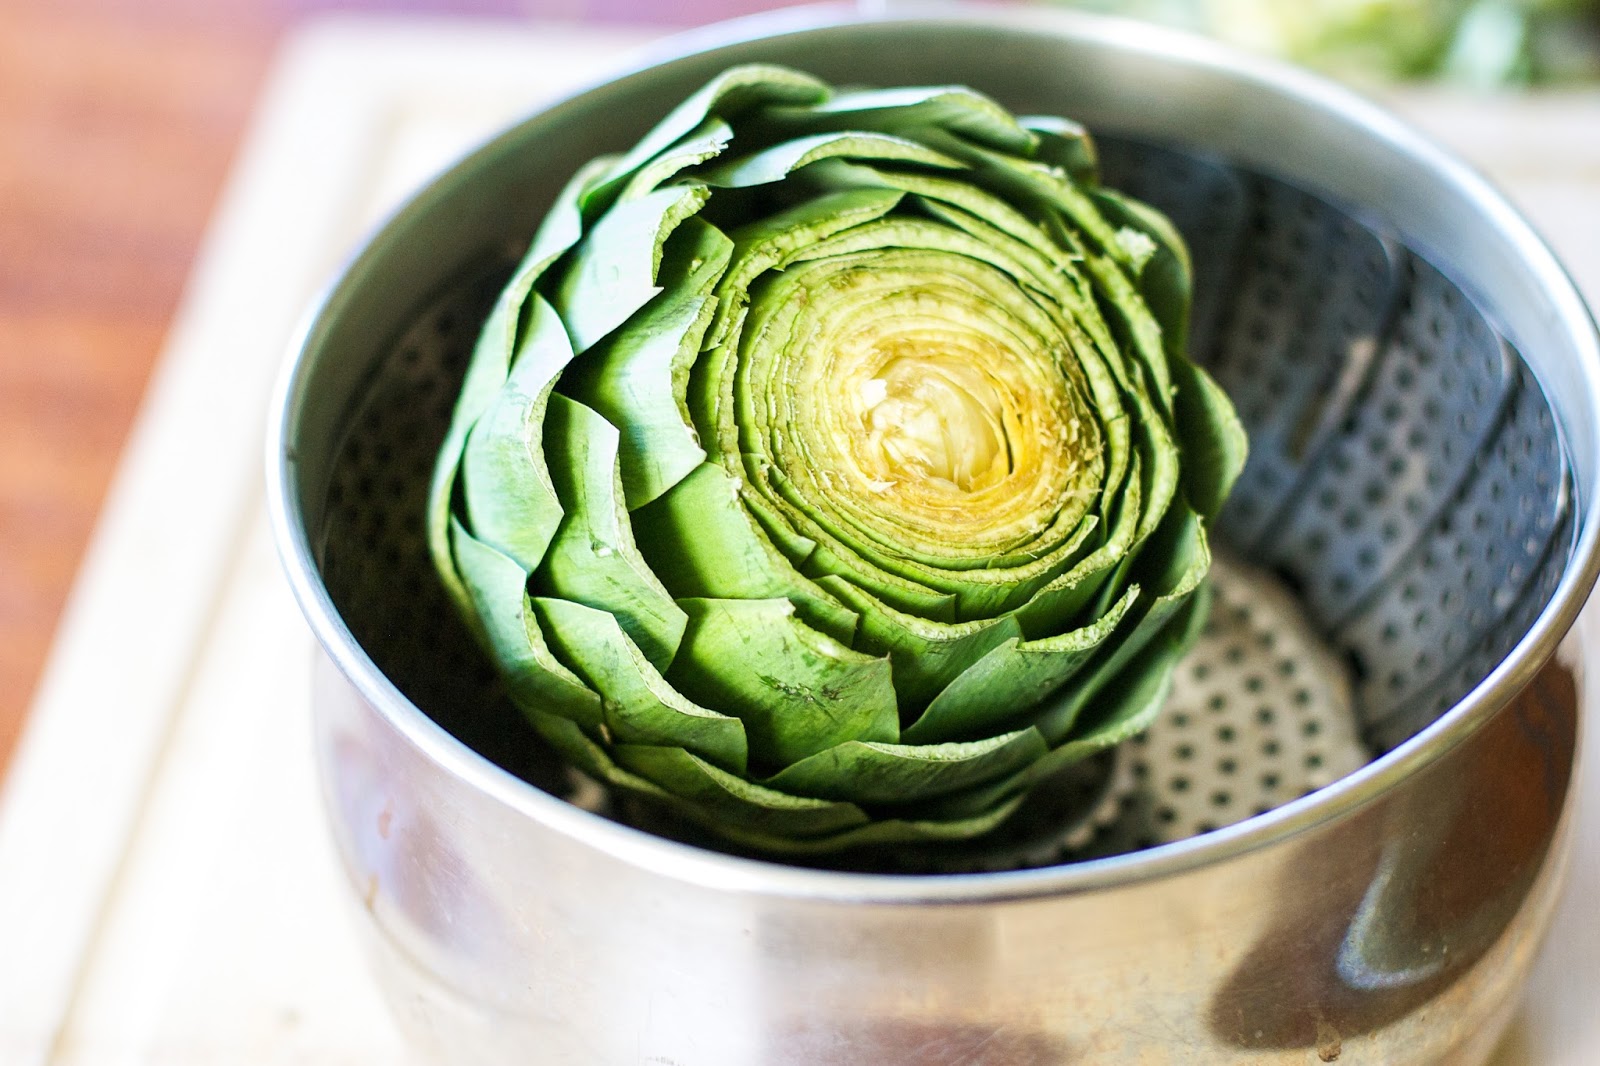 Why YOU should LOVE Artichokes Too!